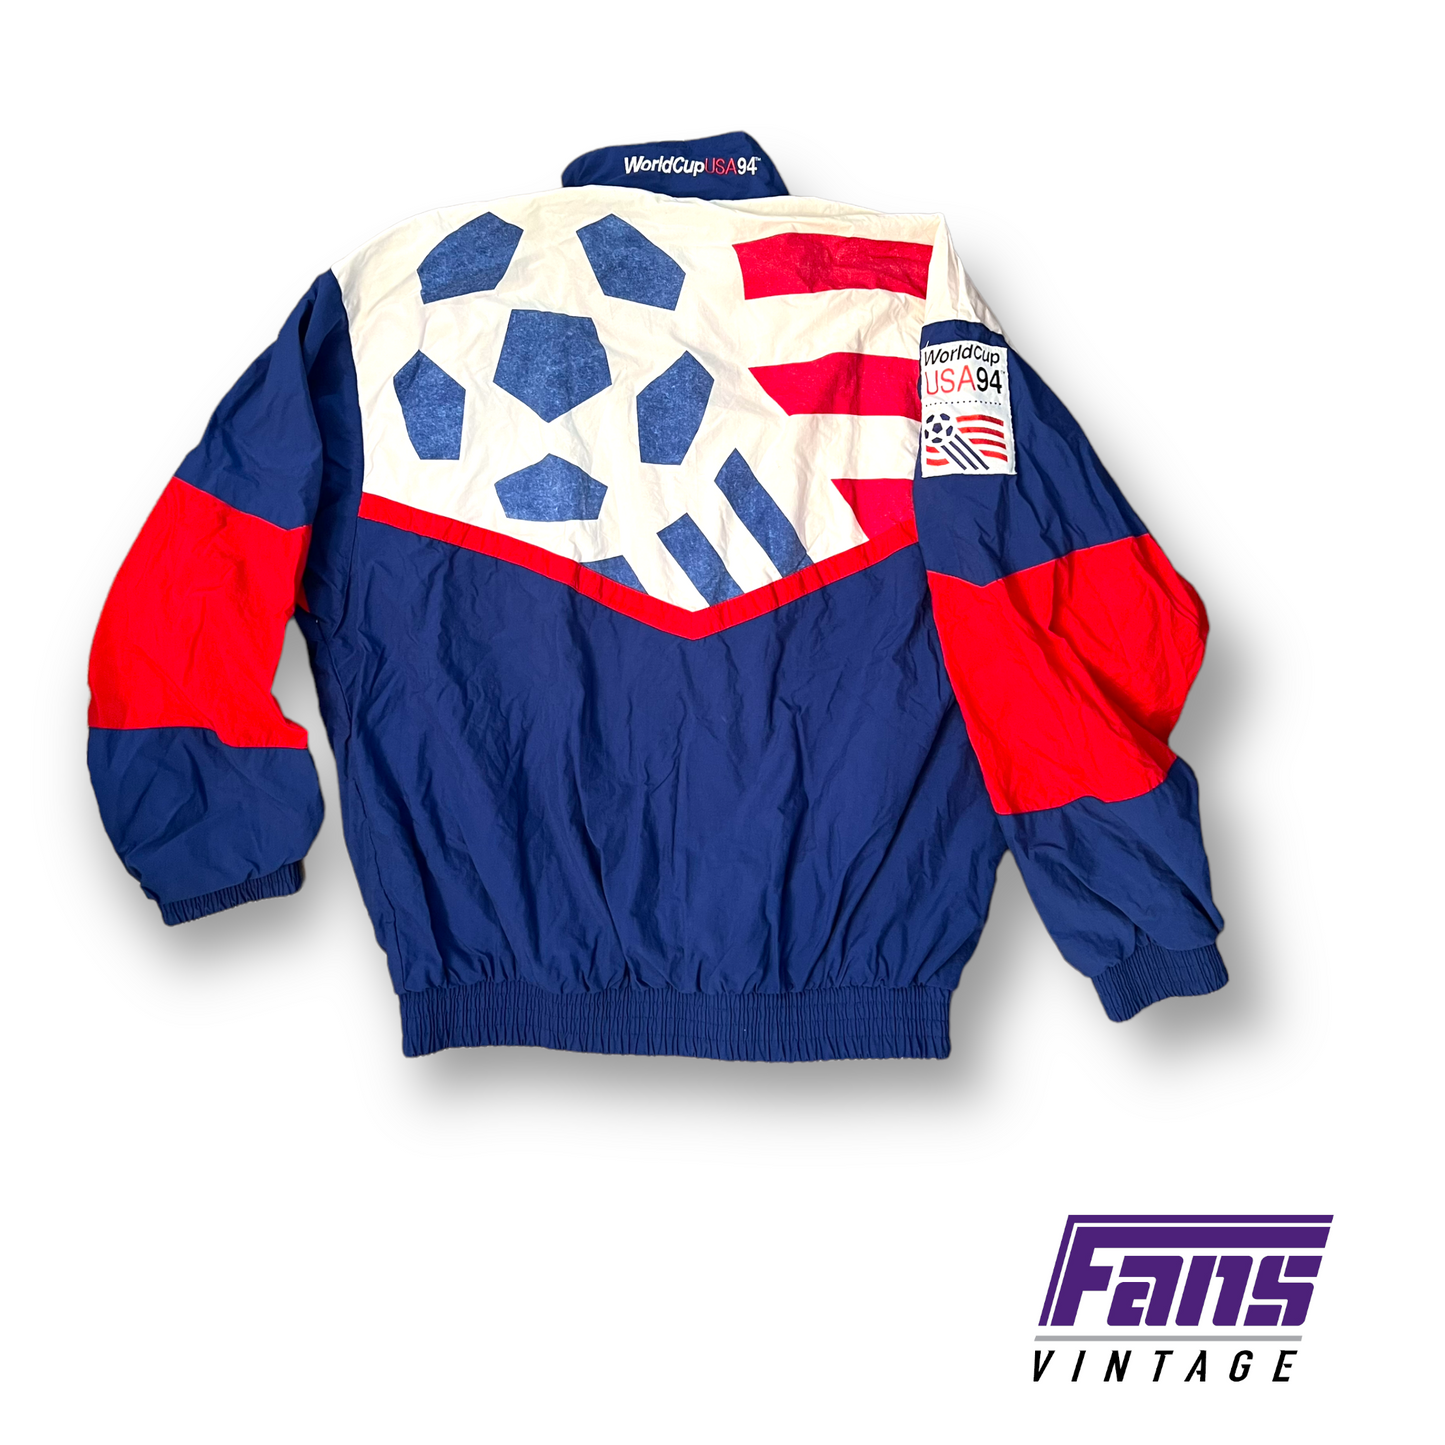 Vintage 1994 World Cup USA Windbreaker with AWESOME details!